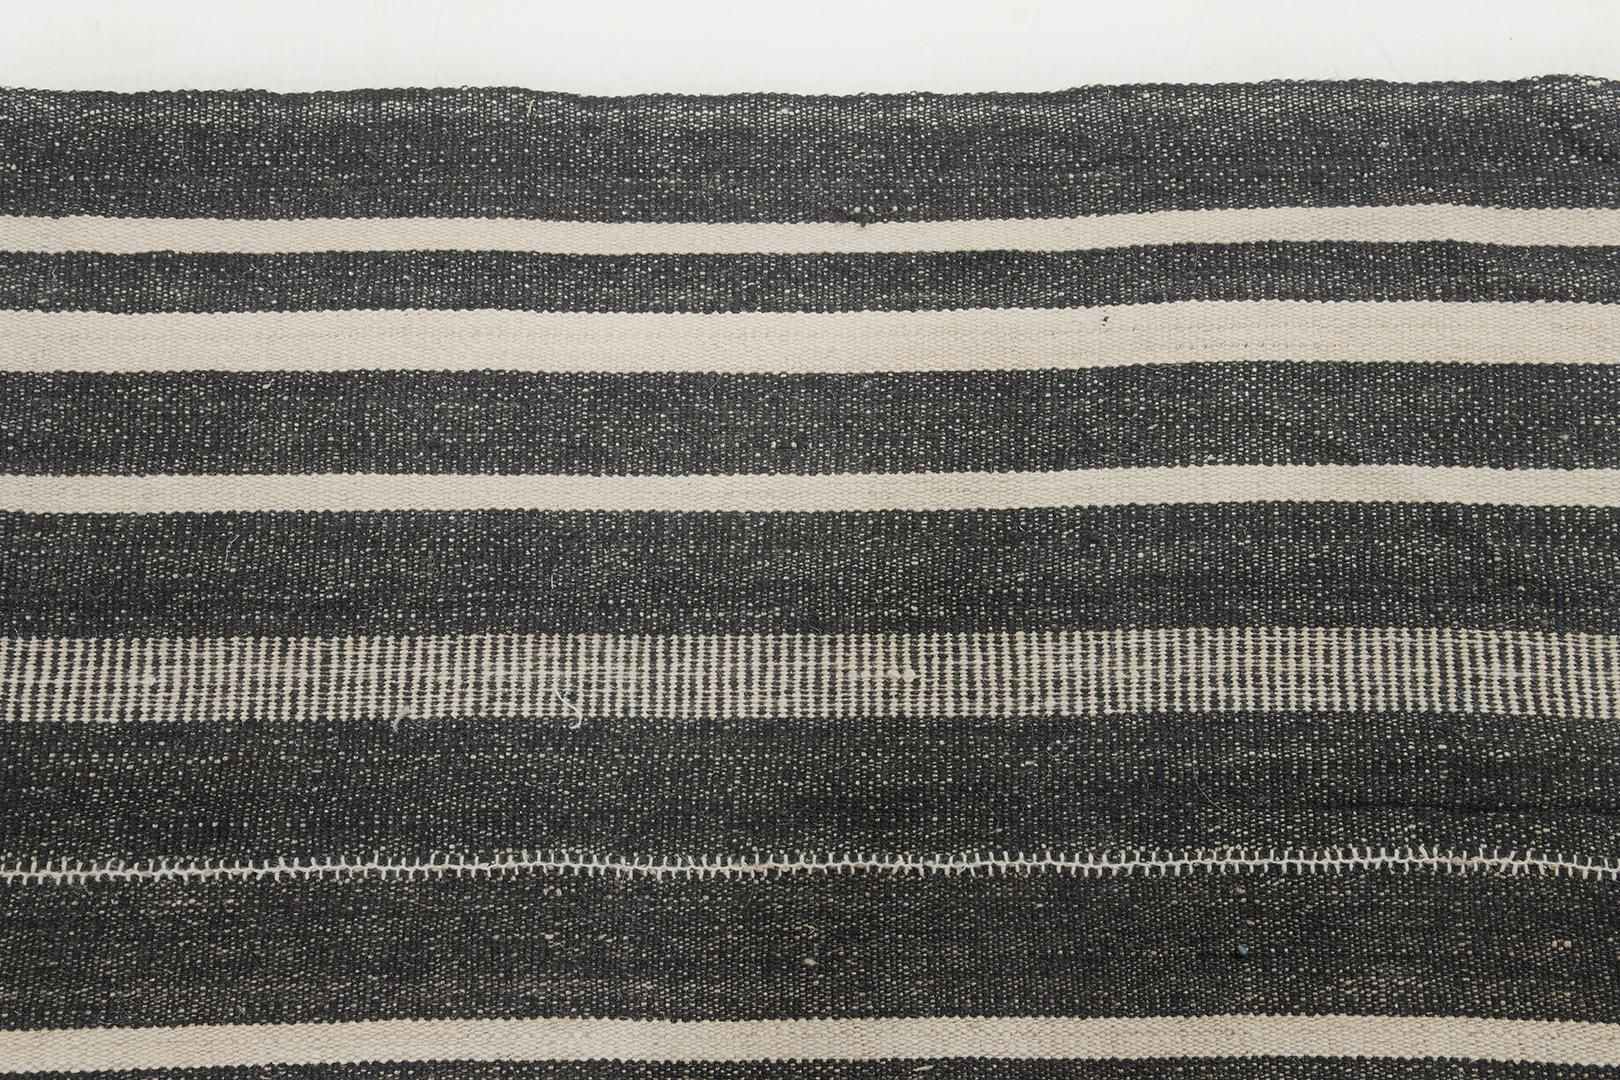 This Persian Jejim Kilim features a flat weave with a versatile pattern of multi-width stripes of black and cream. It is perfectly suited for modern contemporary interiors. These graphic stripes on the rug would be equally at home in a western